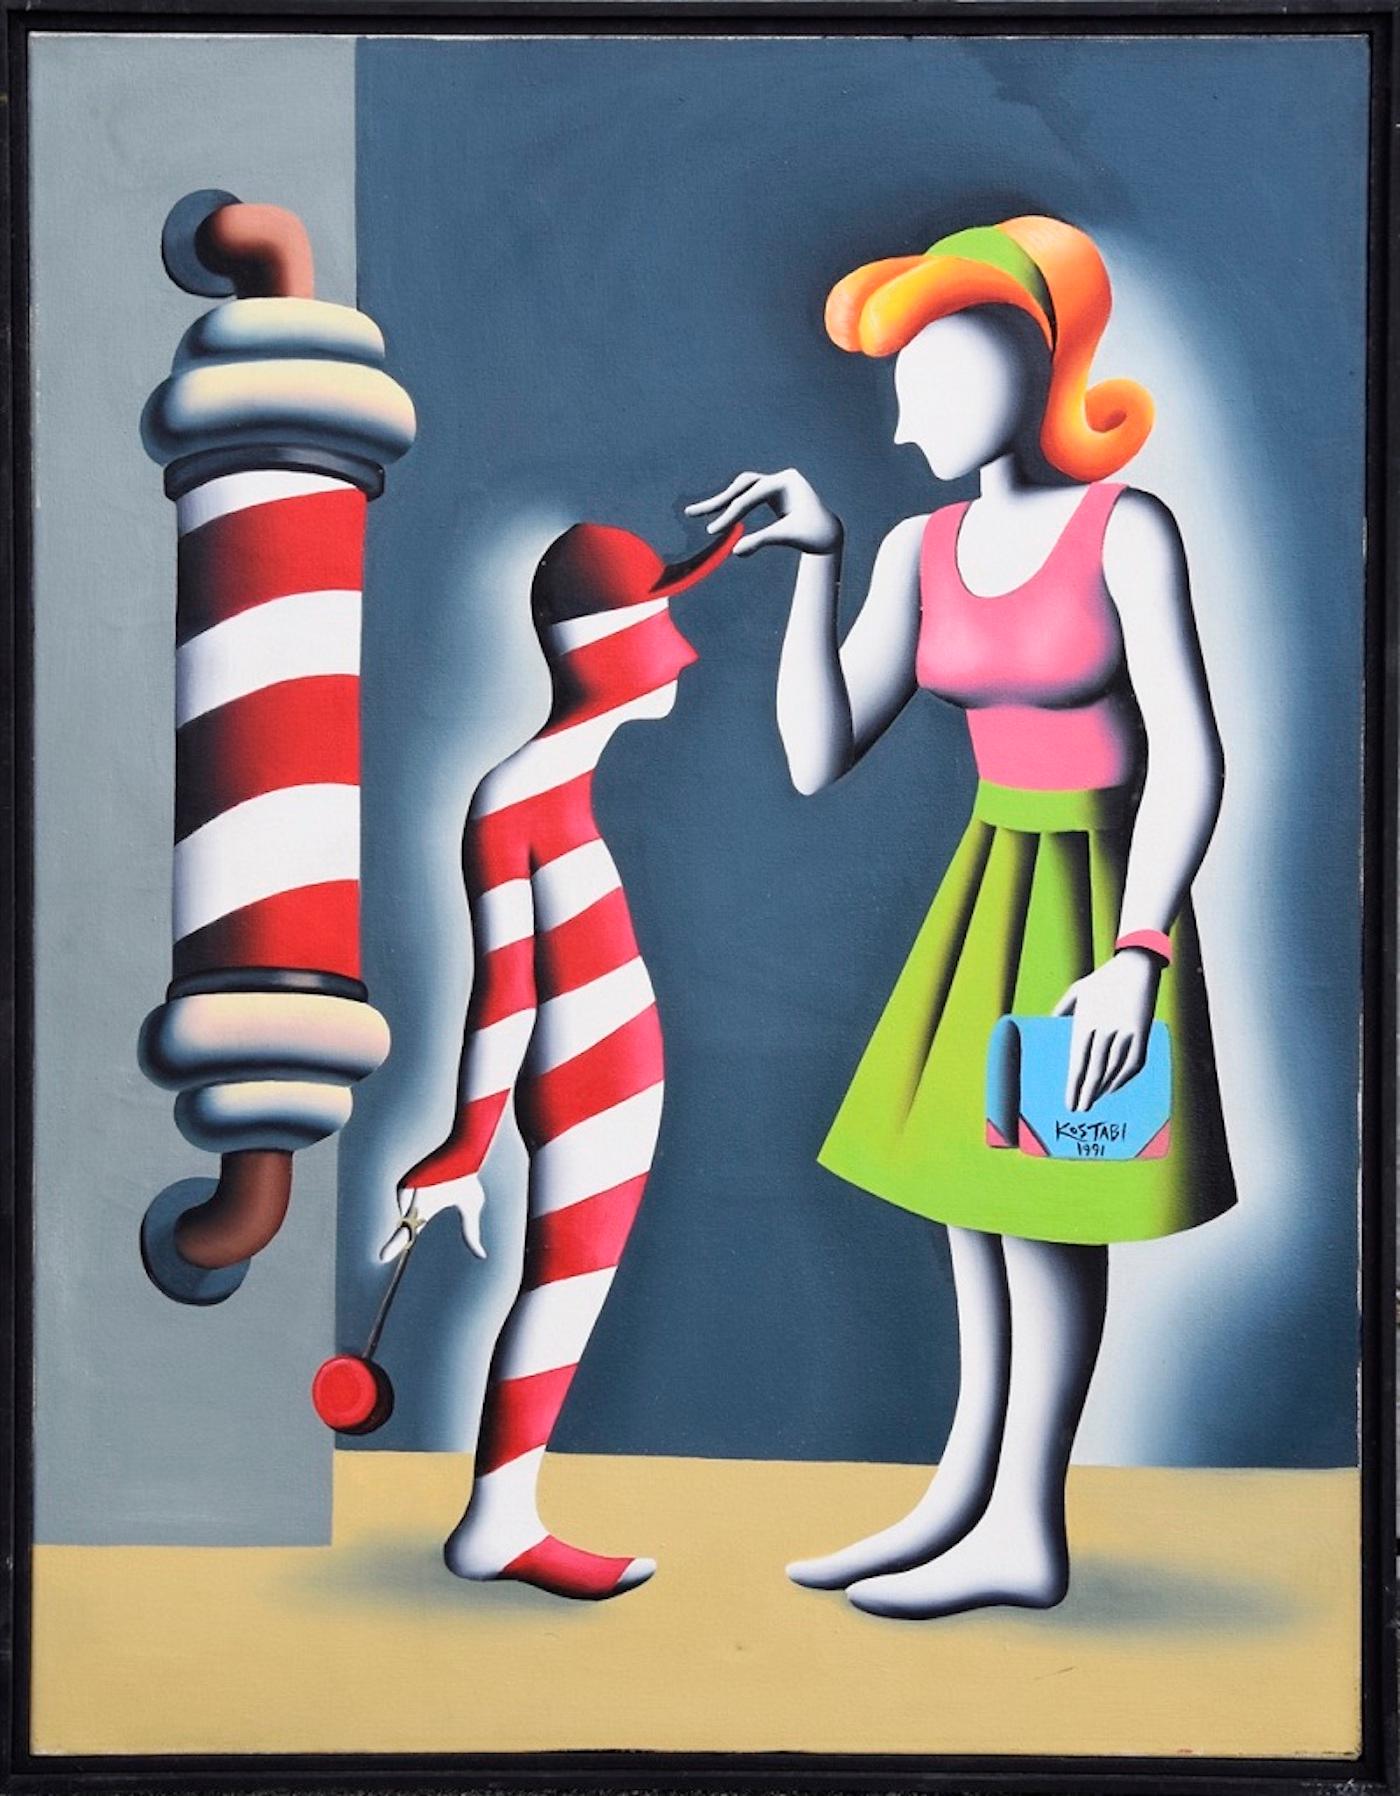 Mark Kostabi Figurative Painting - Gnorance s-the Rot of all Evil - Oil on Canvas by M. Kostabi - 1991